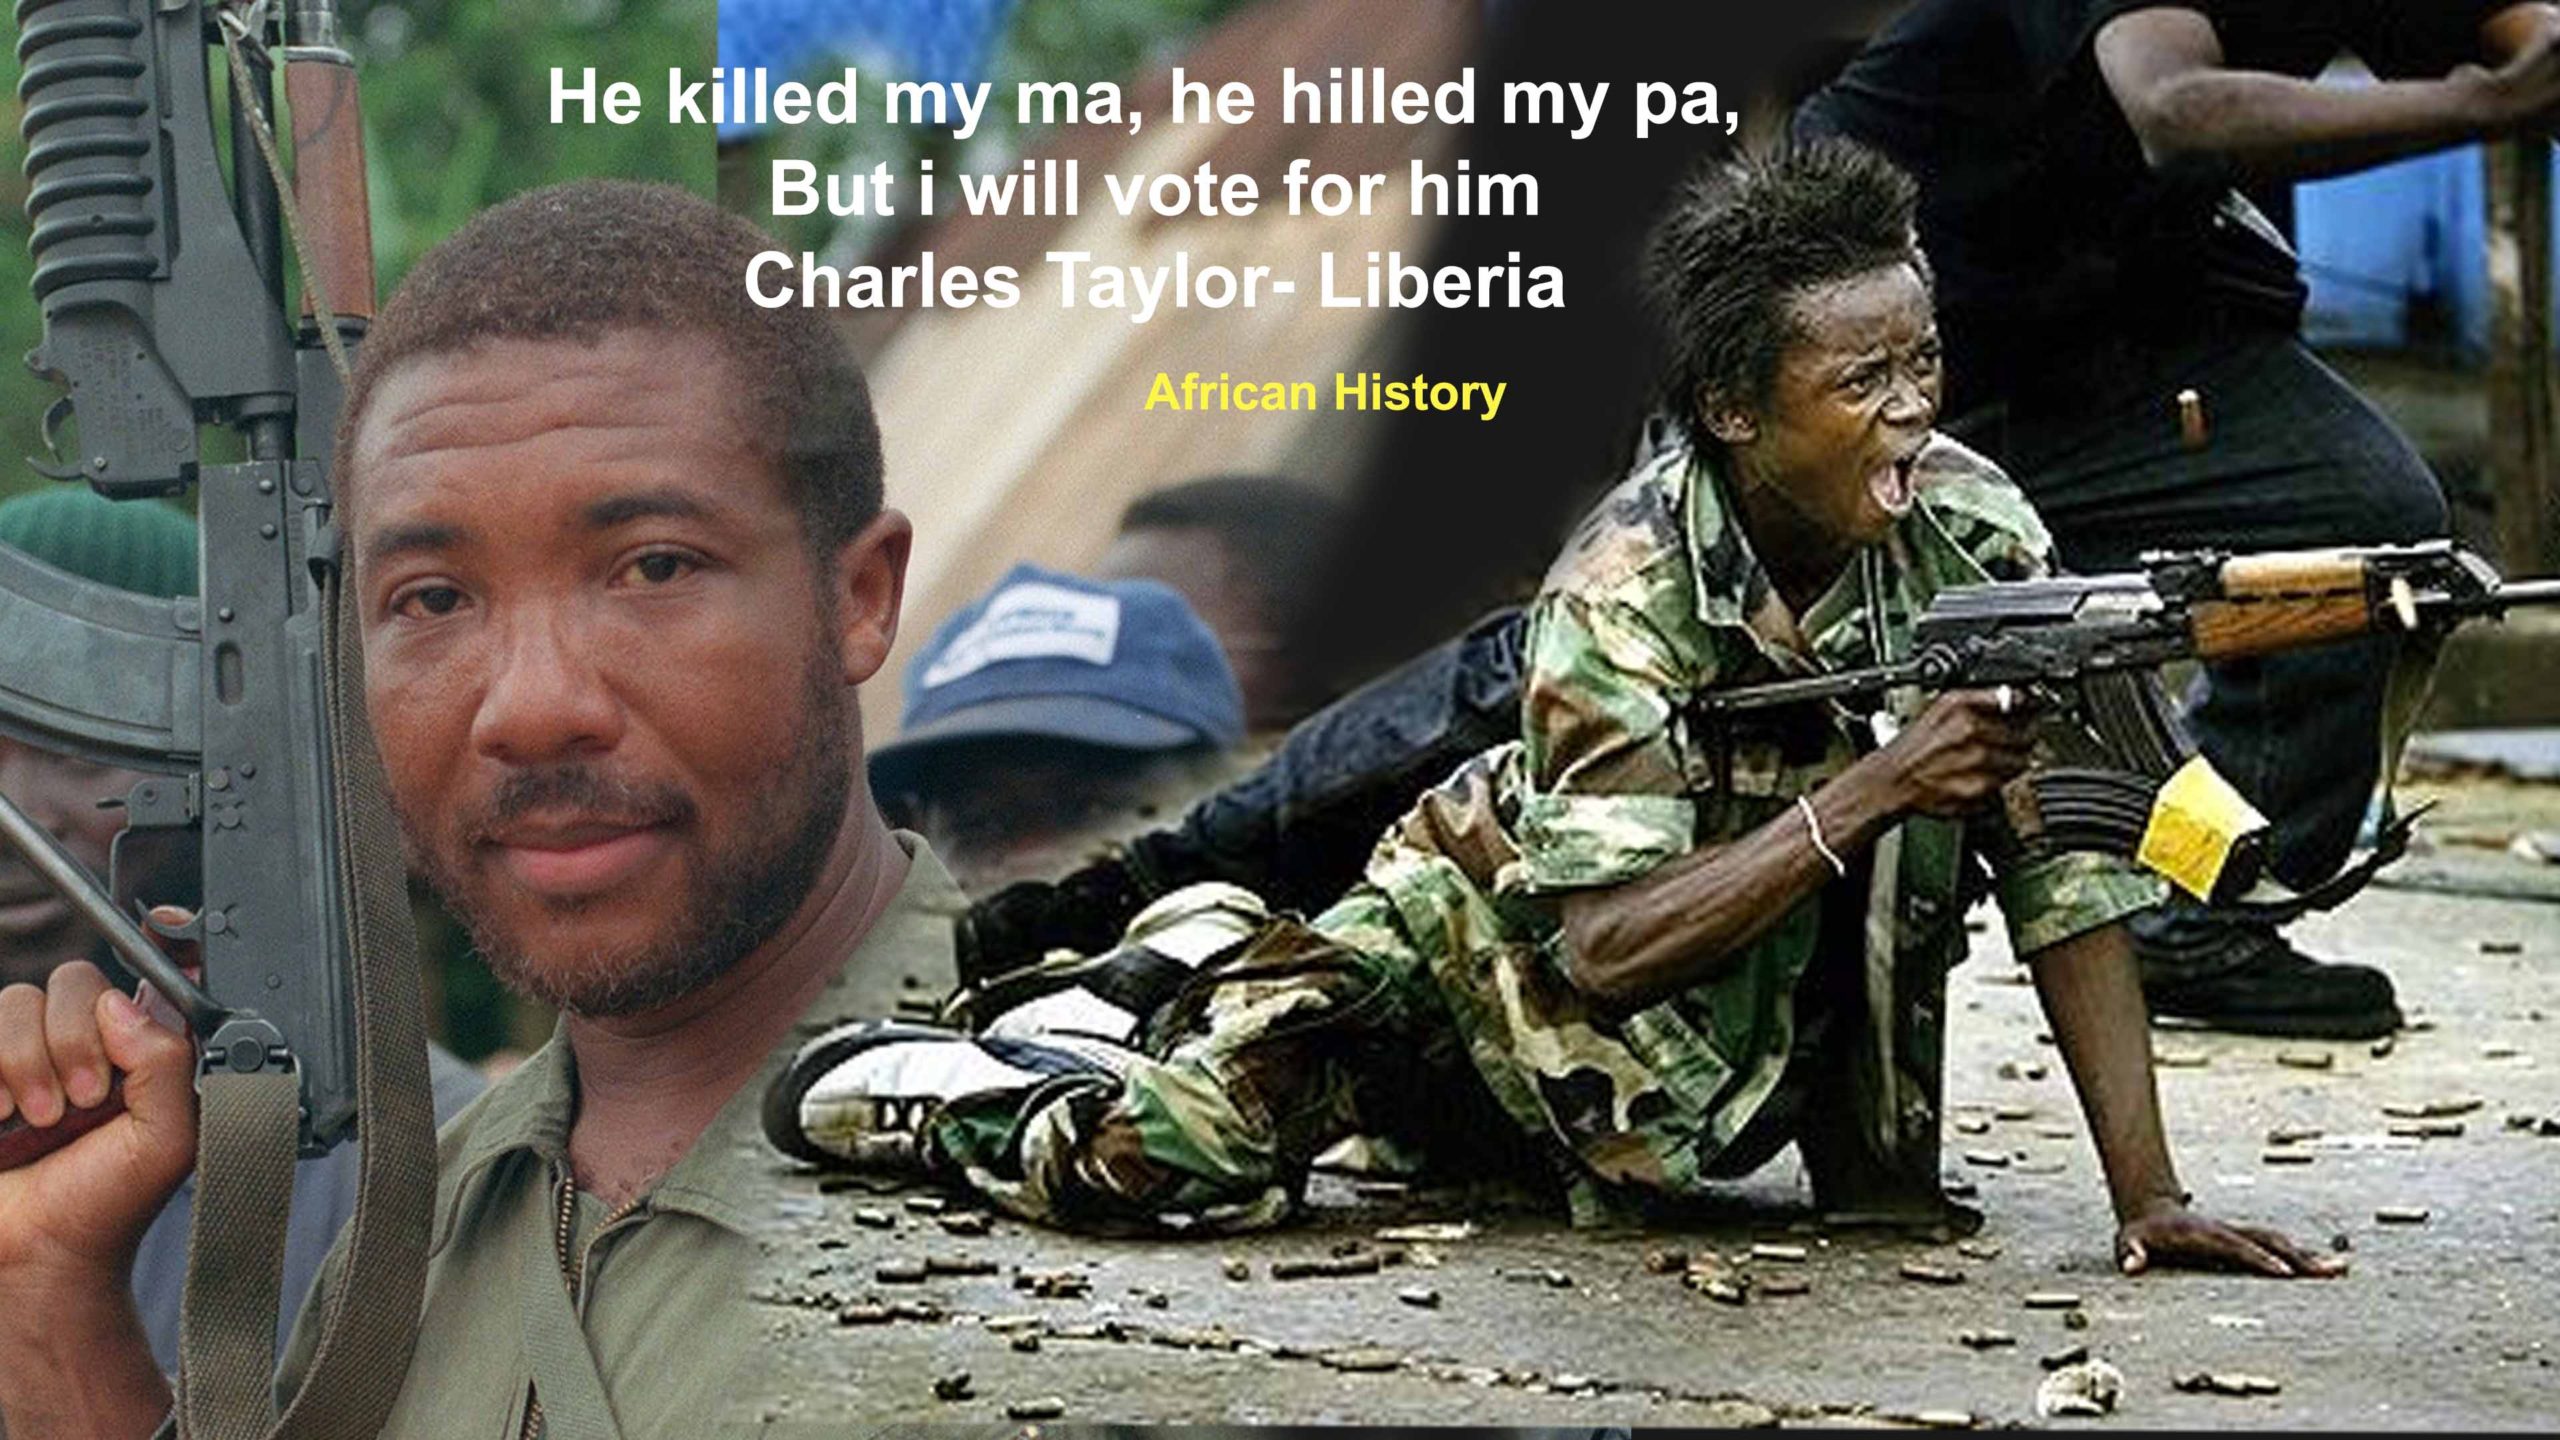 African History: He killed my ma, he killed my pa, But i will vote for him. Charles Taylor- Liberia Afro News Wire